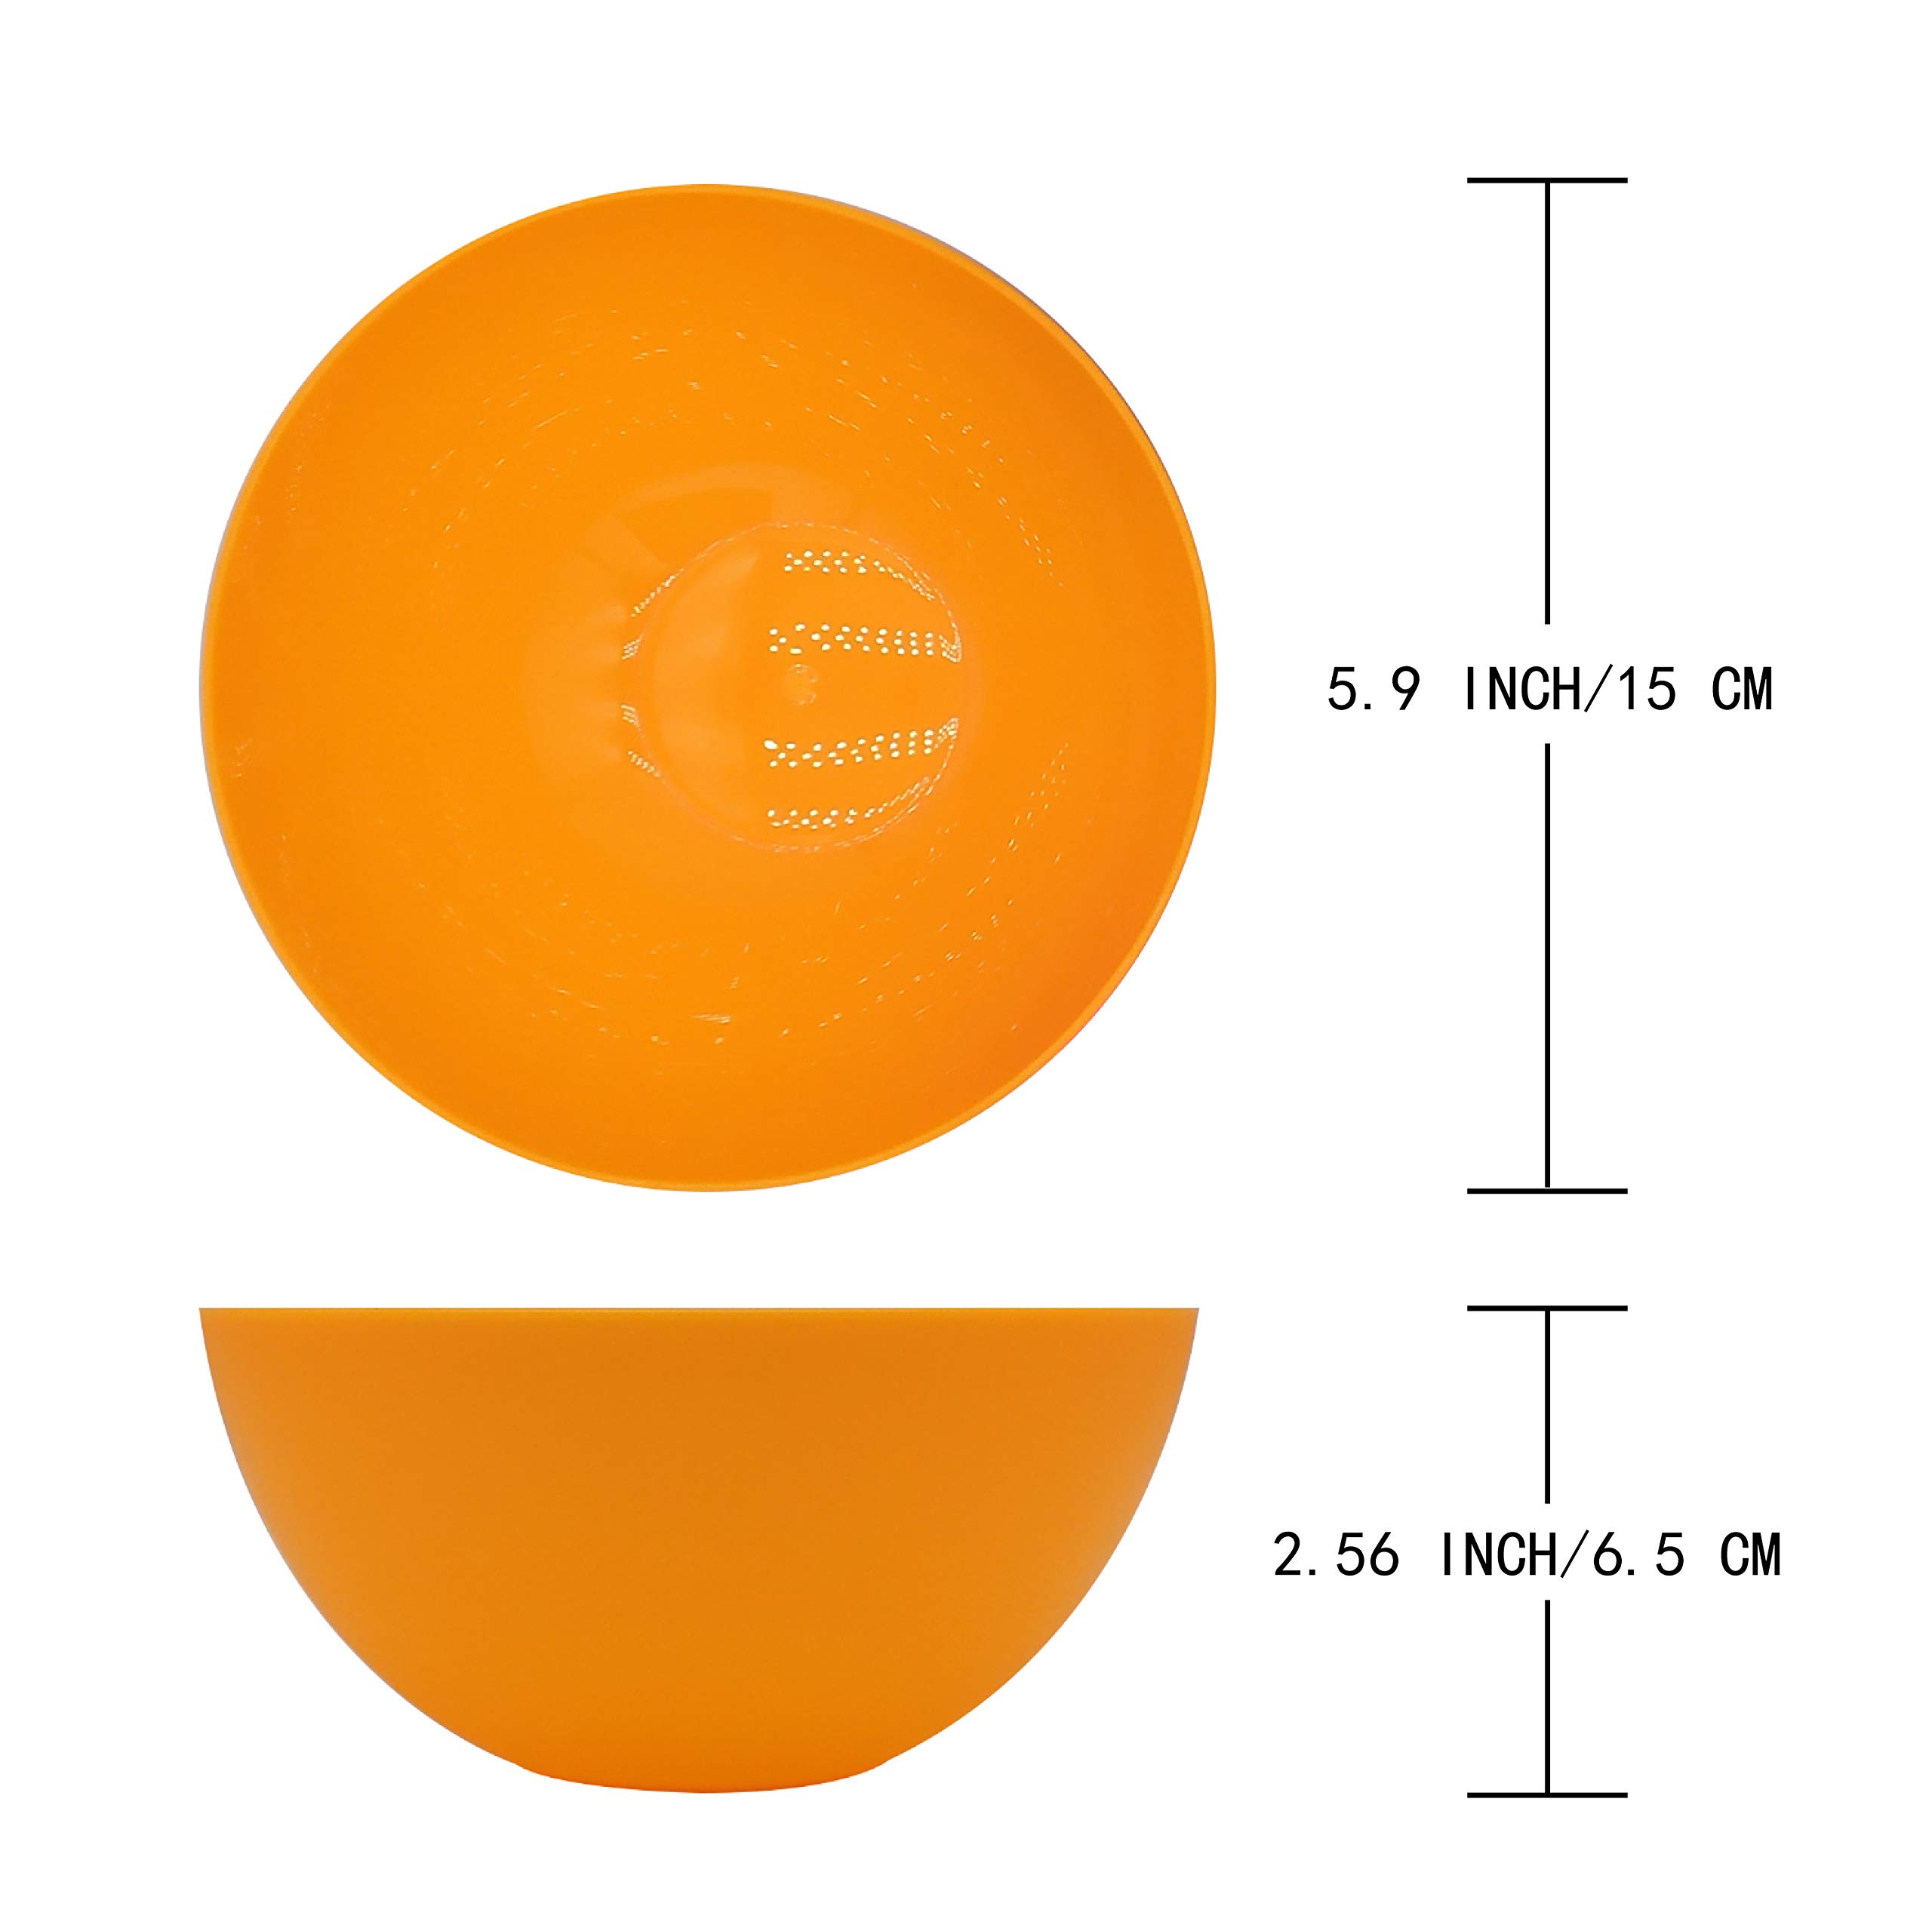 DLF. DONGLINFENG Plastic Bowls set of 12 - Unbreakable and Reusable 24oz/5.9 inch Plastic Cereal/Soup/Salad Bowls in4 Assorted Color | Dishwasher Safe, BPA Free